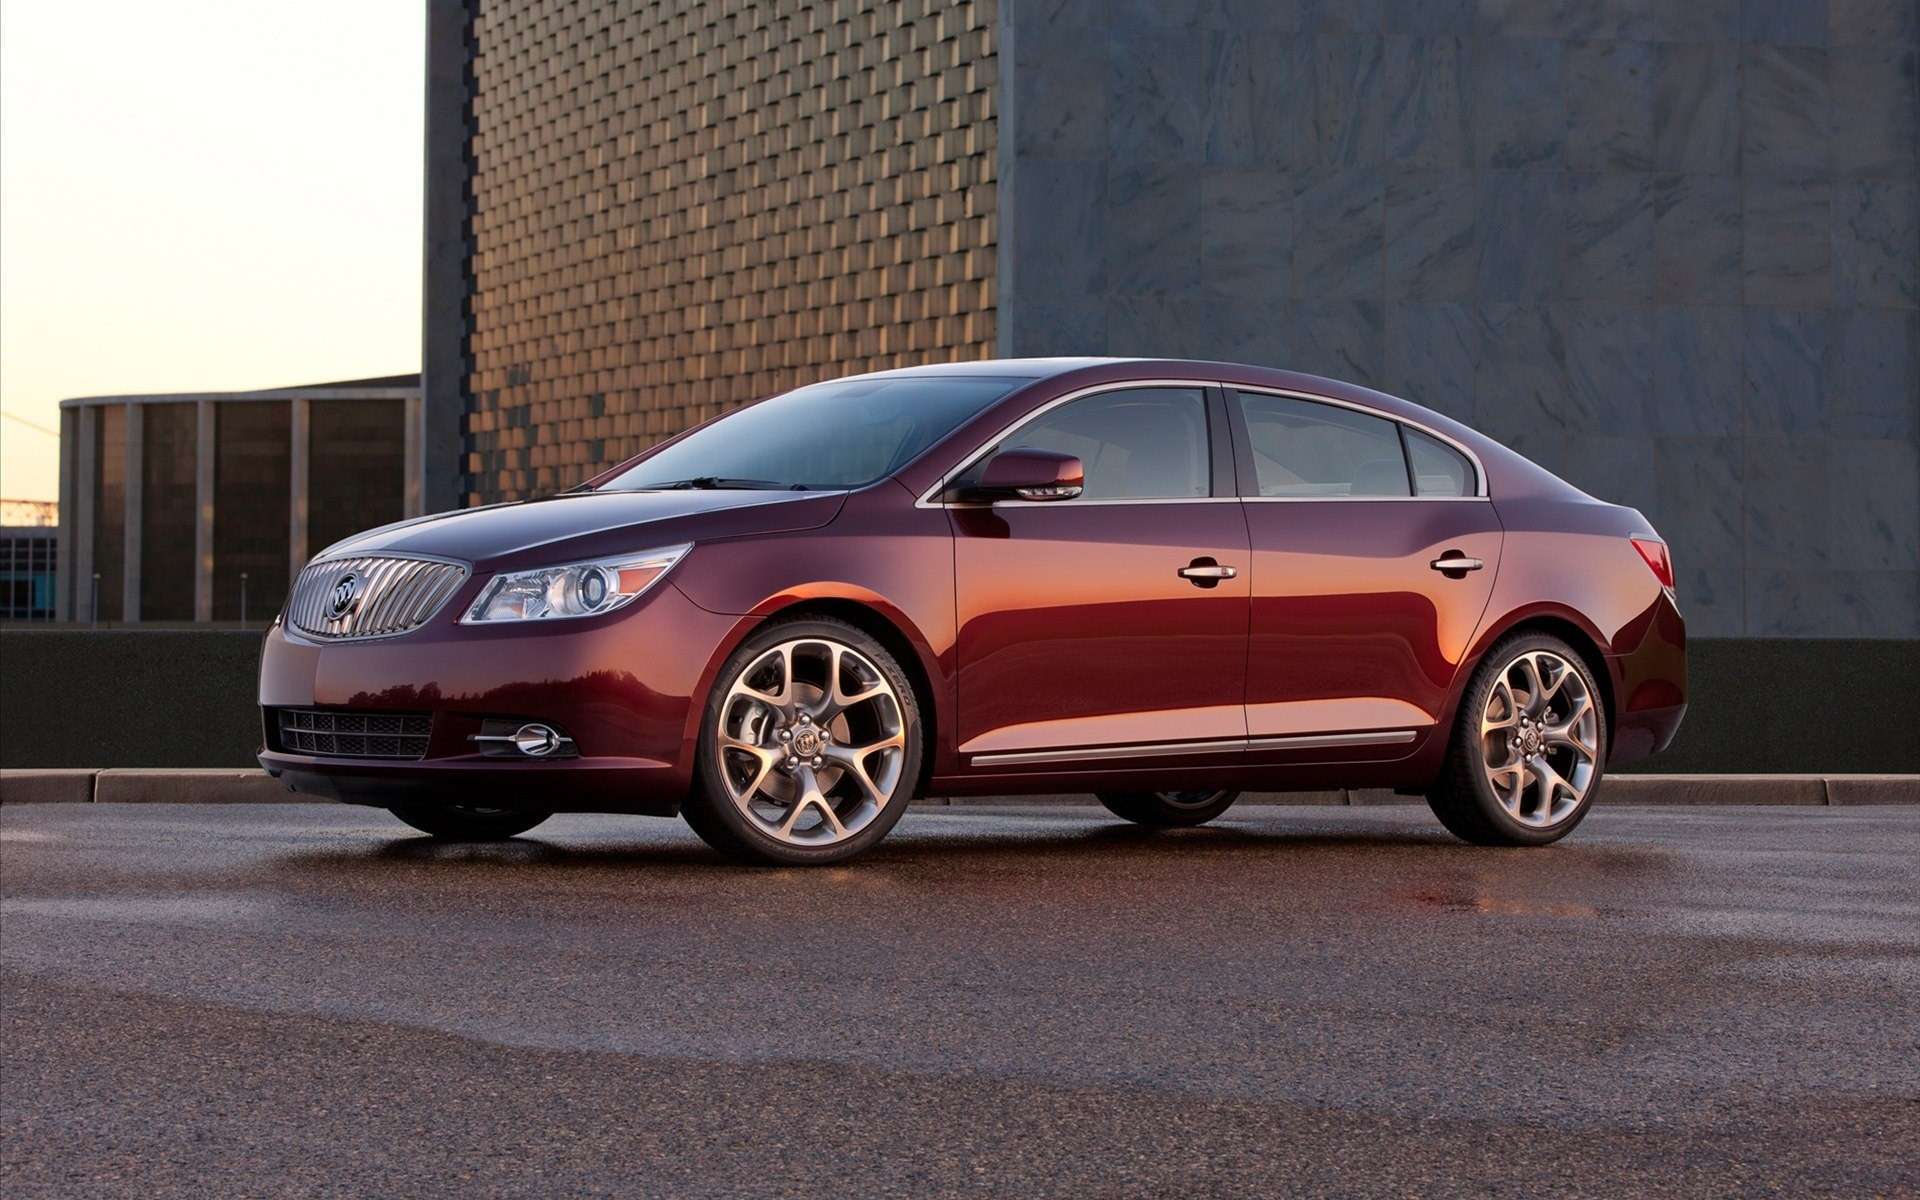 Wallpaper Buick Lacrosse Car HD Upload At August